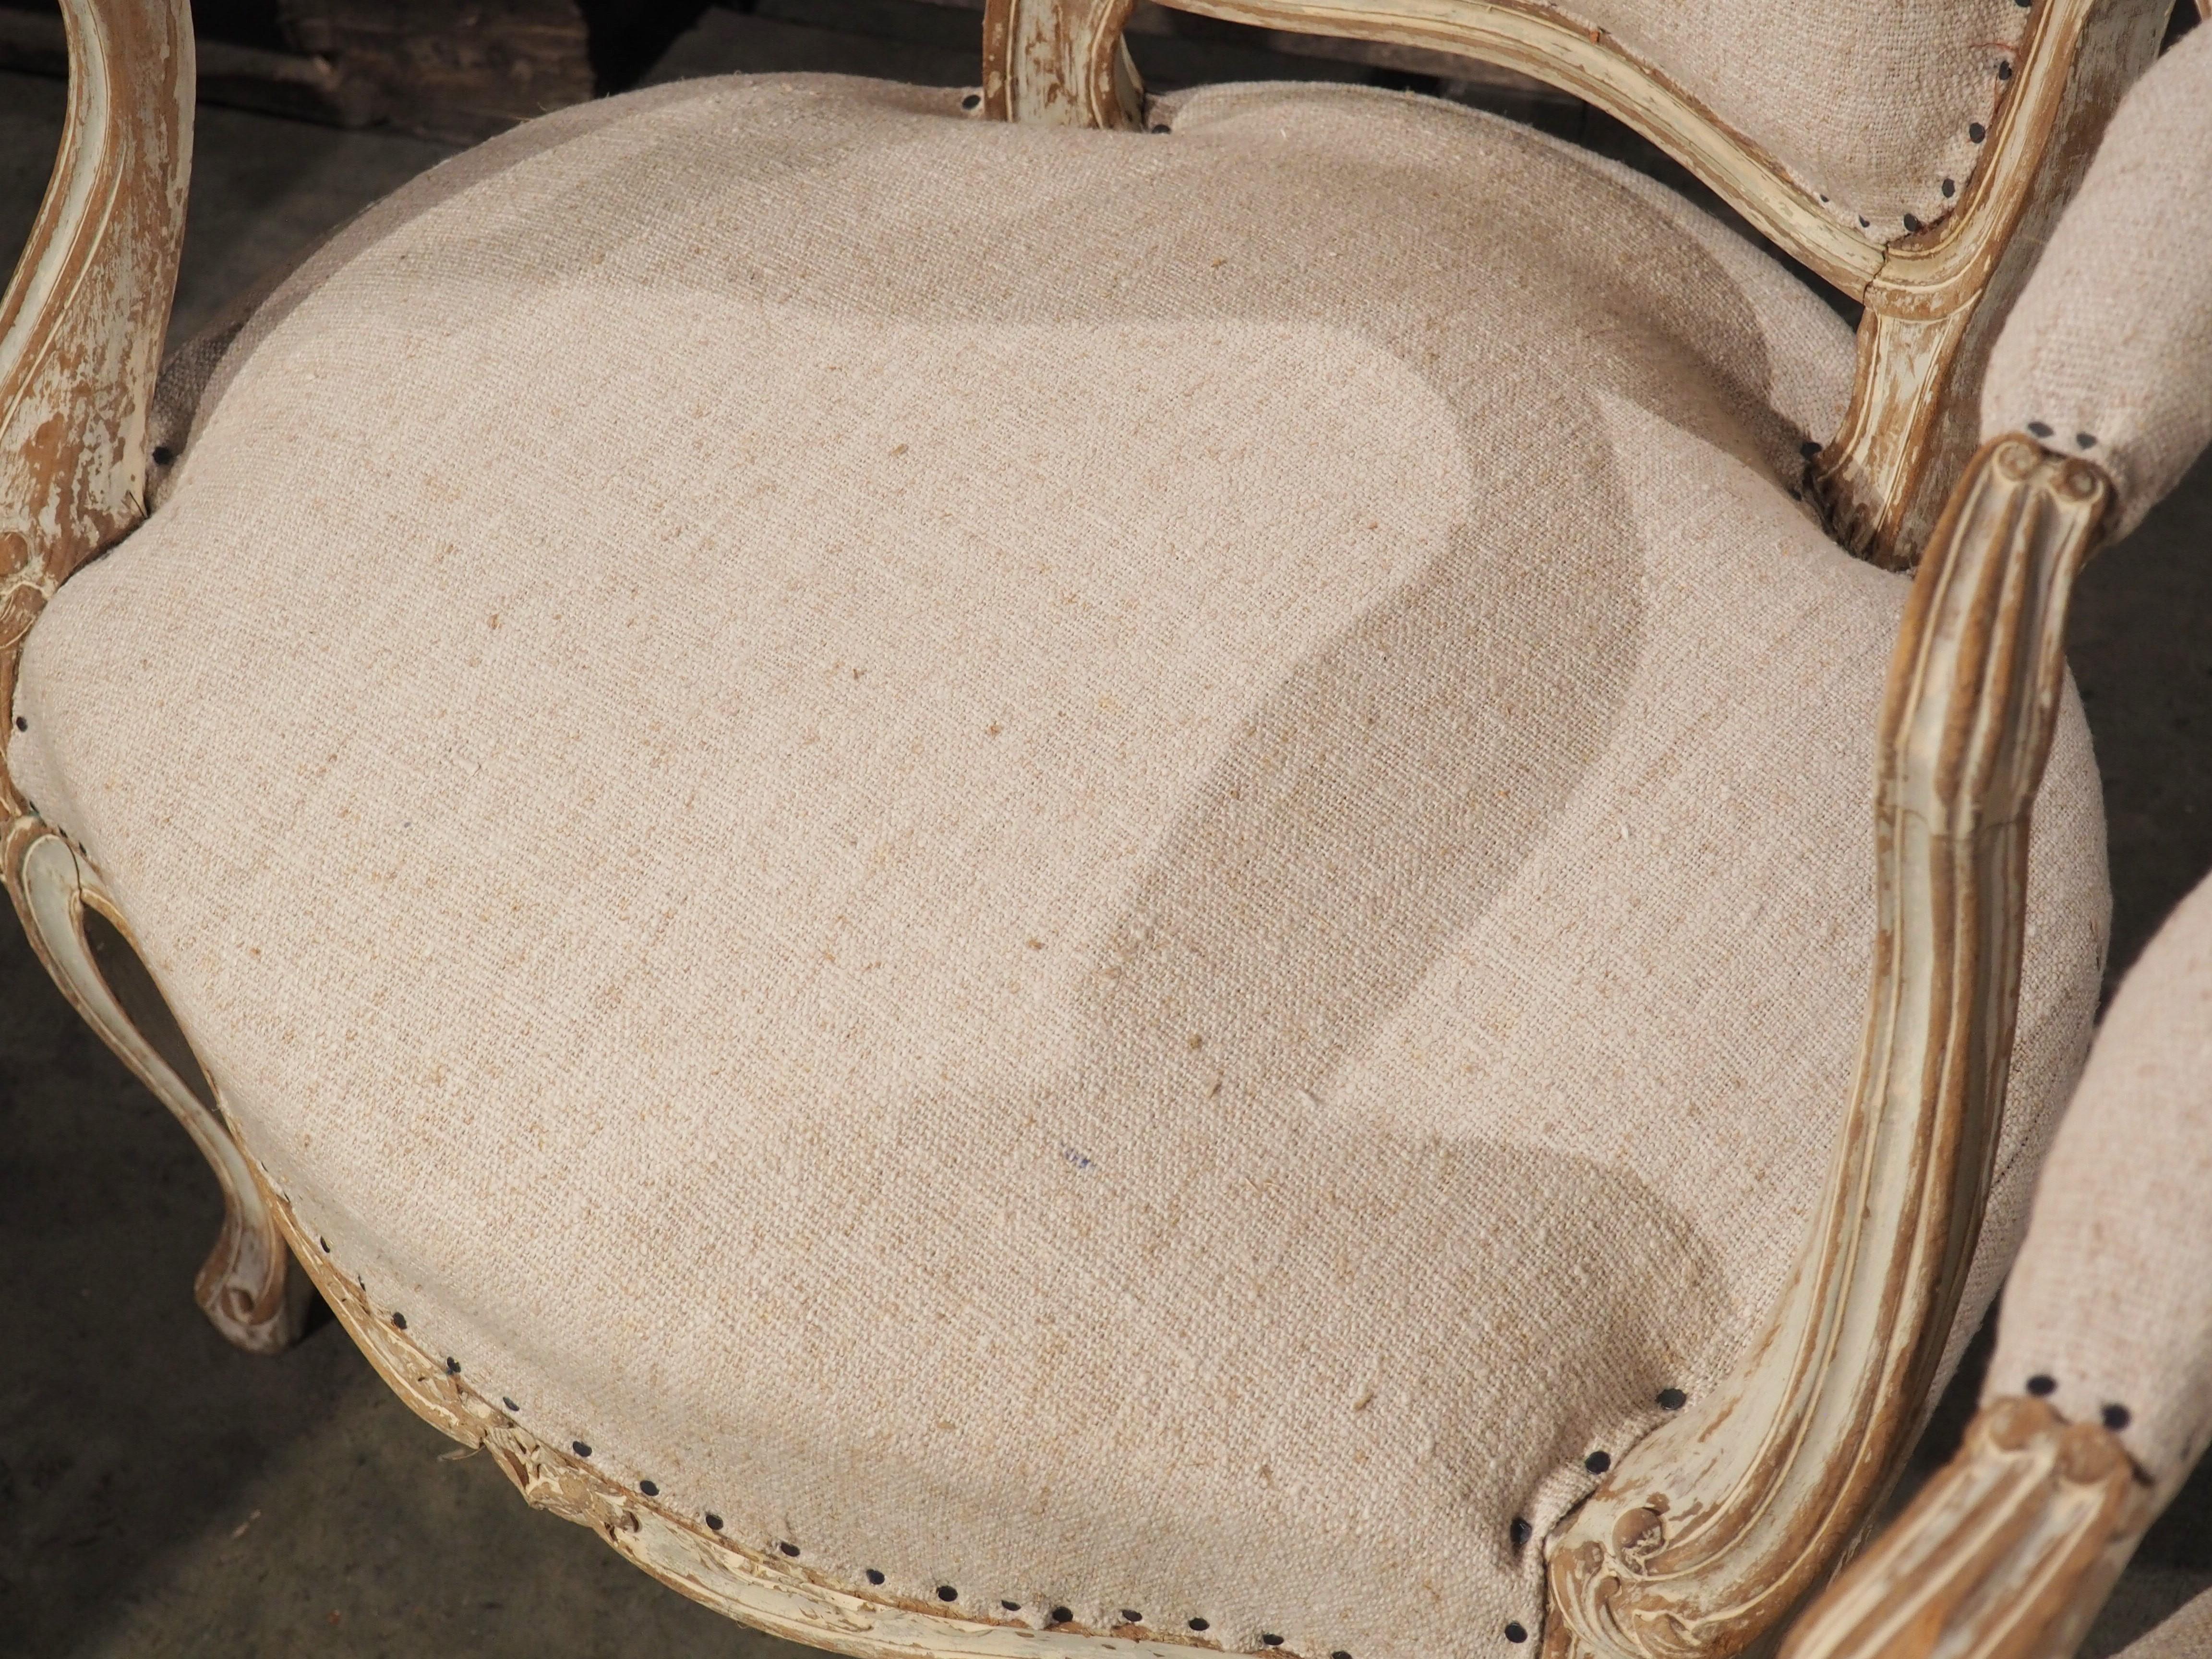 One of the most popular types of chairs from the reign of Louis XV was known as a cabriolet armchair, which was easy to move around to accommodate guests. The pair of parcel paint cabriolet armchairs seen here were hand-carved in France in the late